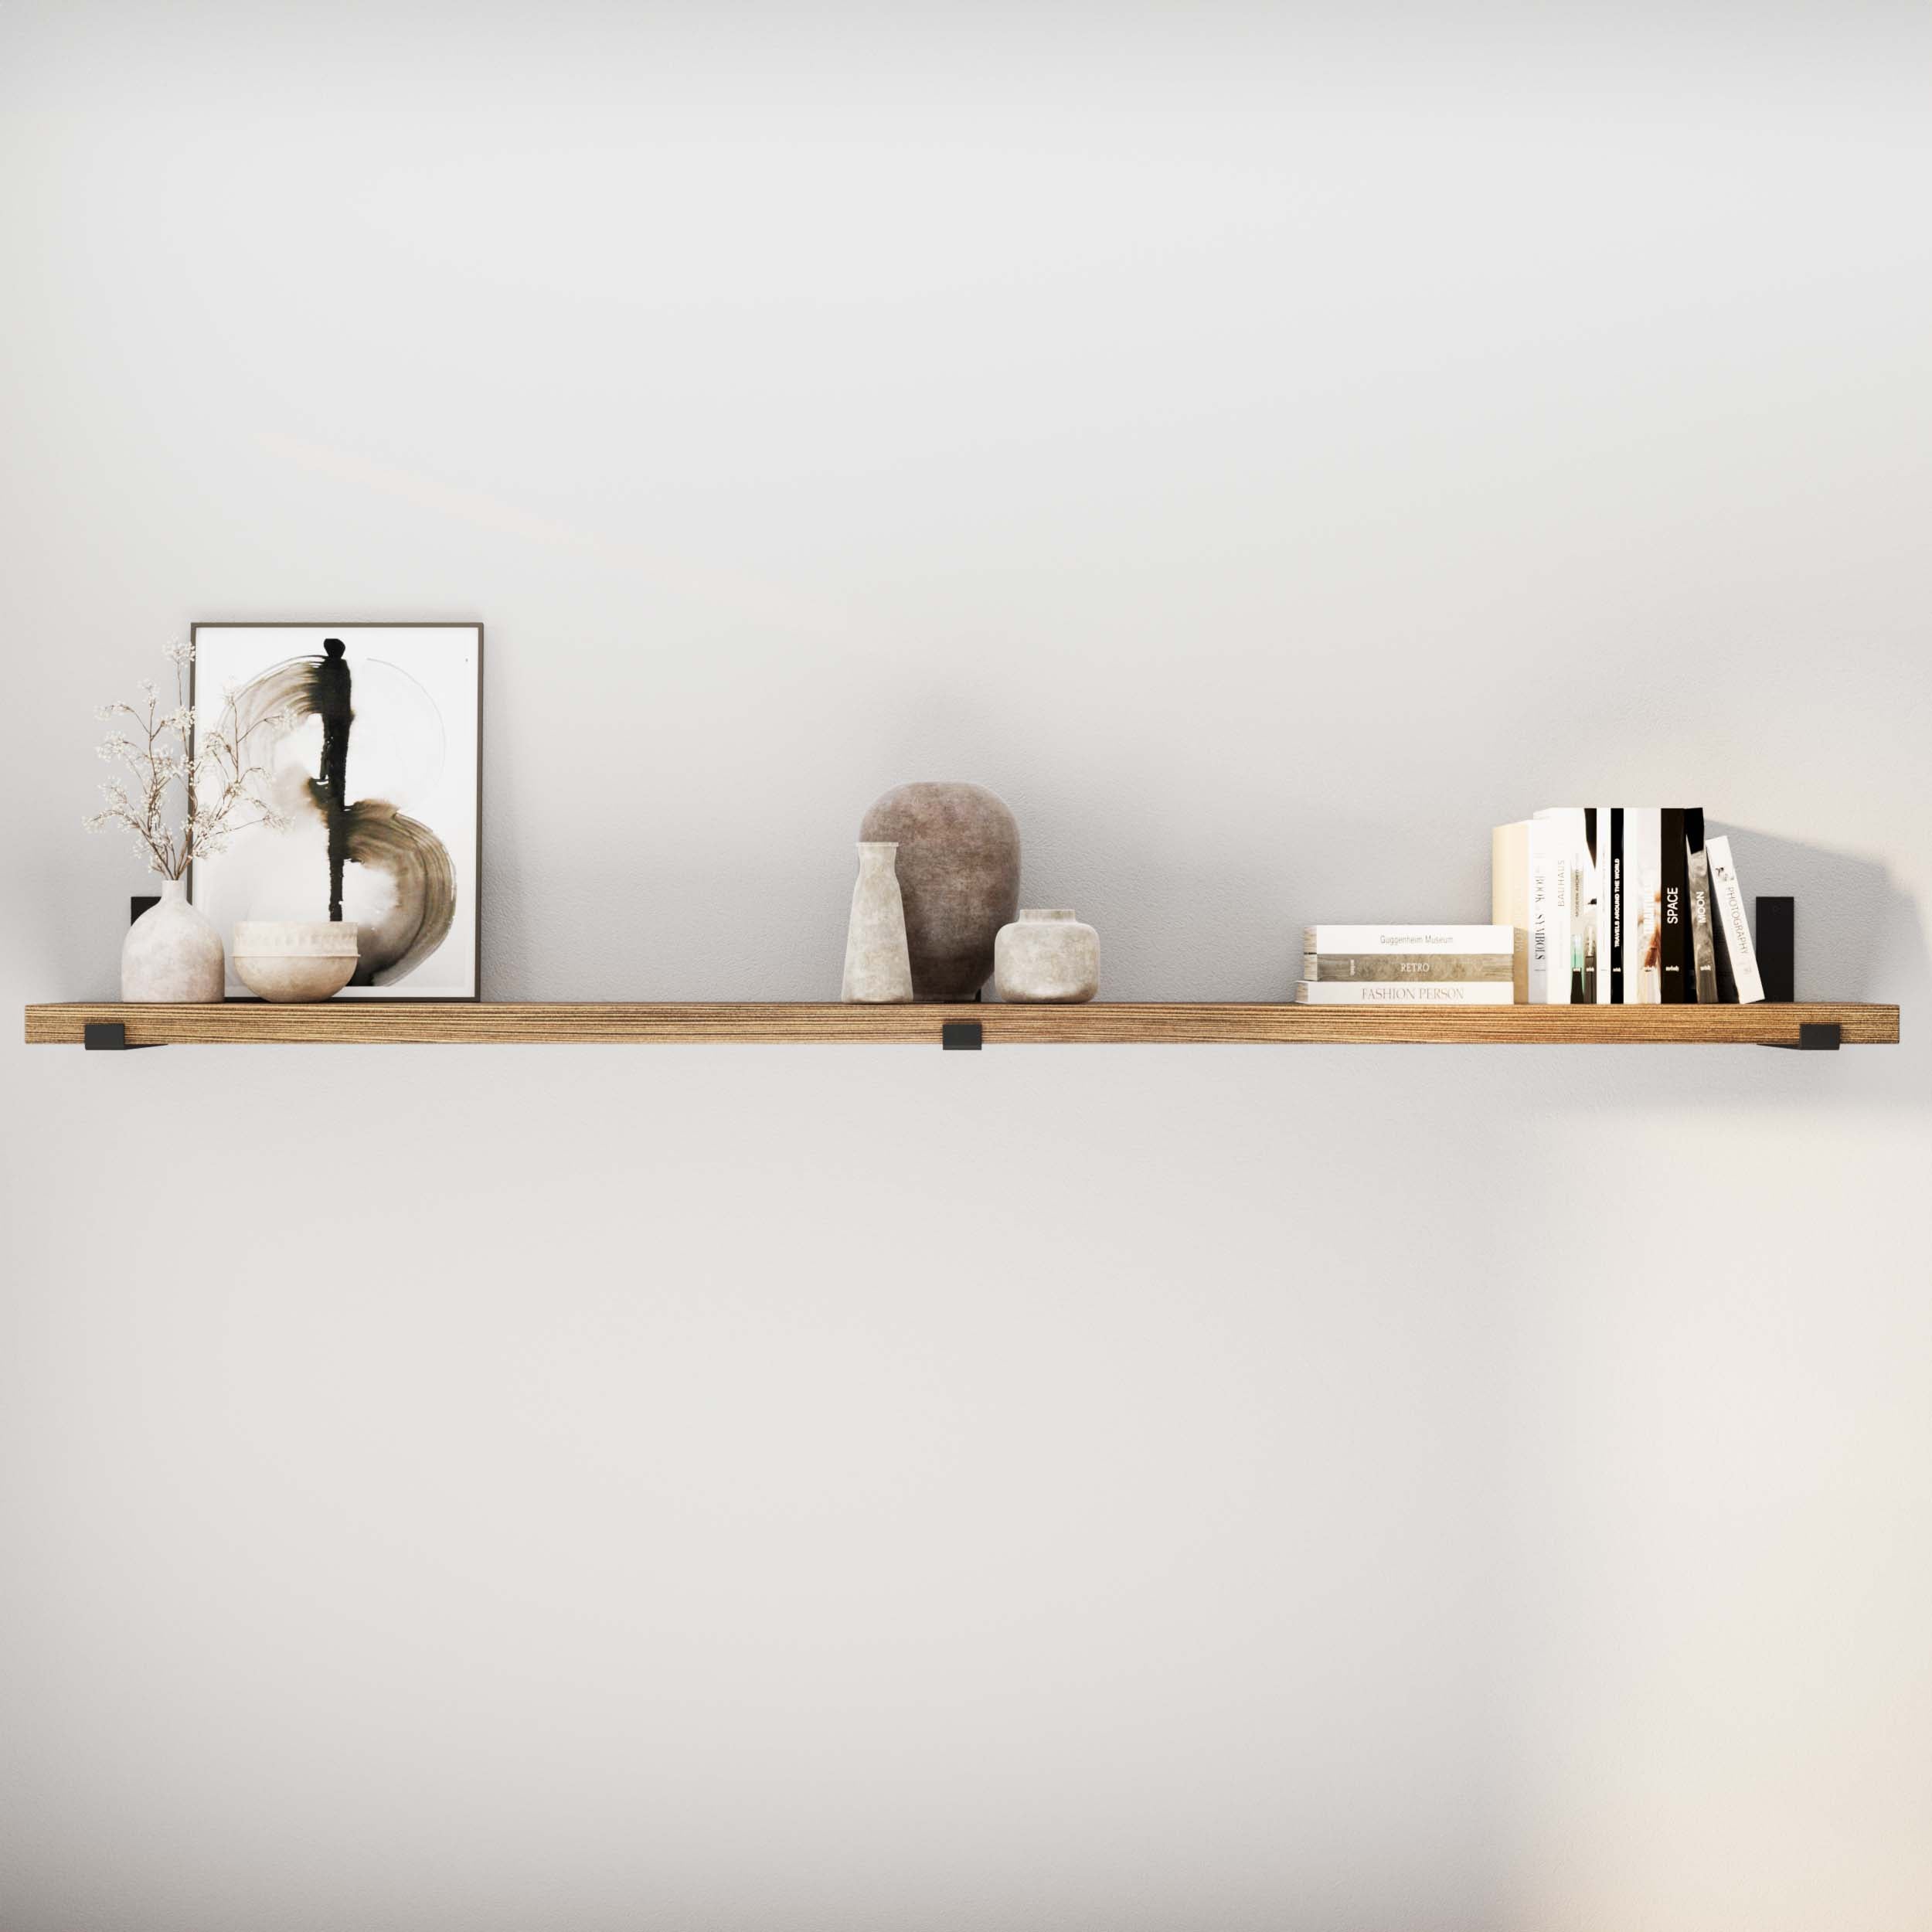 Decorative objects and books on a 72 inch floating shelf against a plain wall.